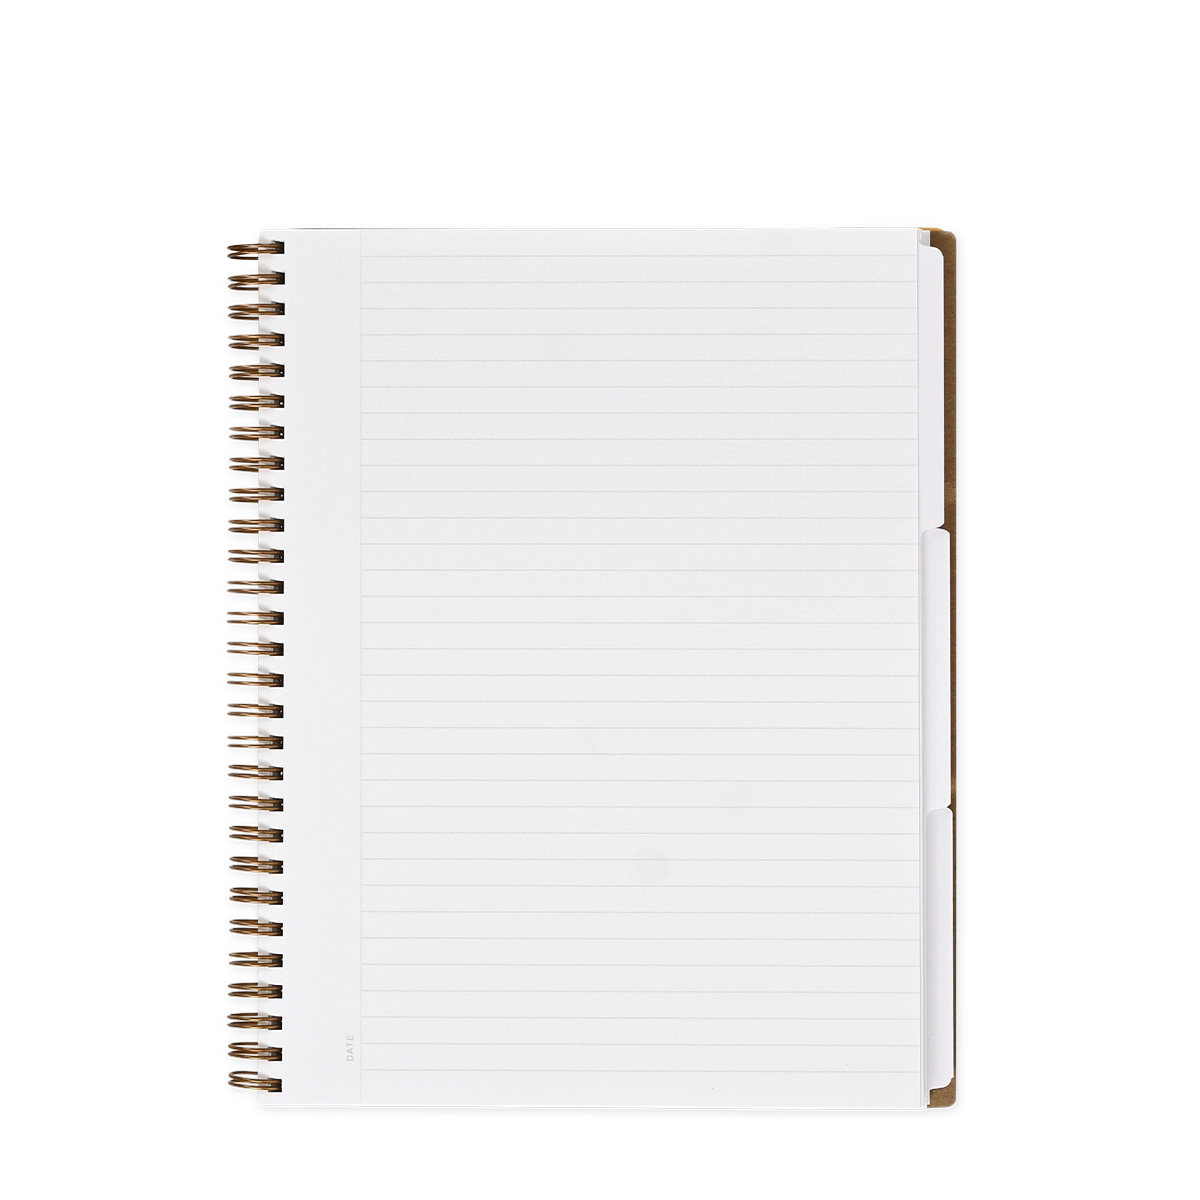 APPOINTED - THREE SUBJECT NOTEBOOK - OXFORD BLUE - LINED